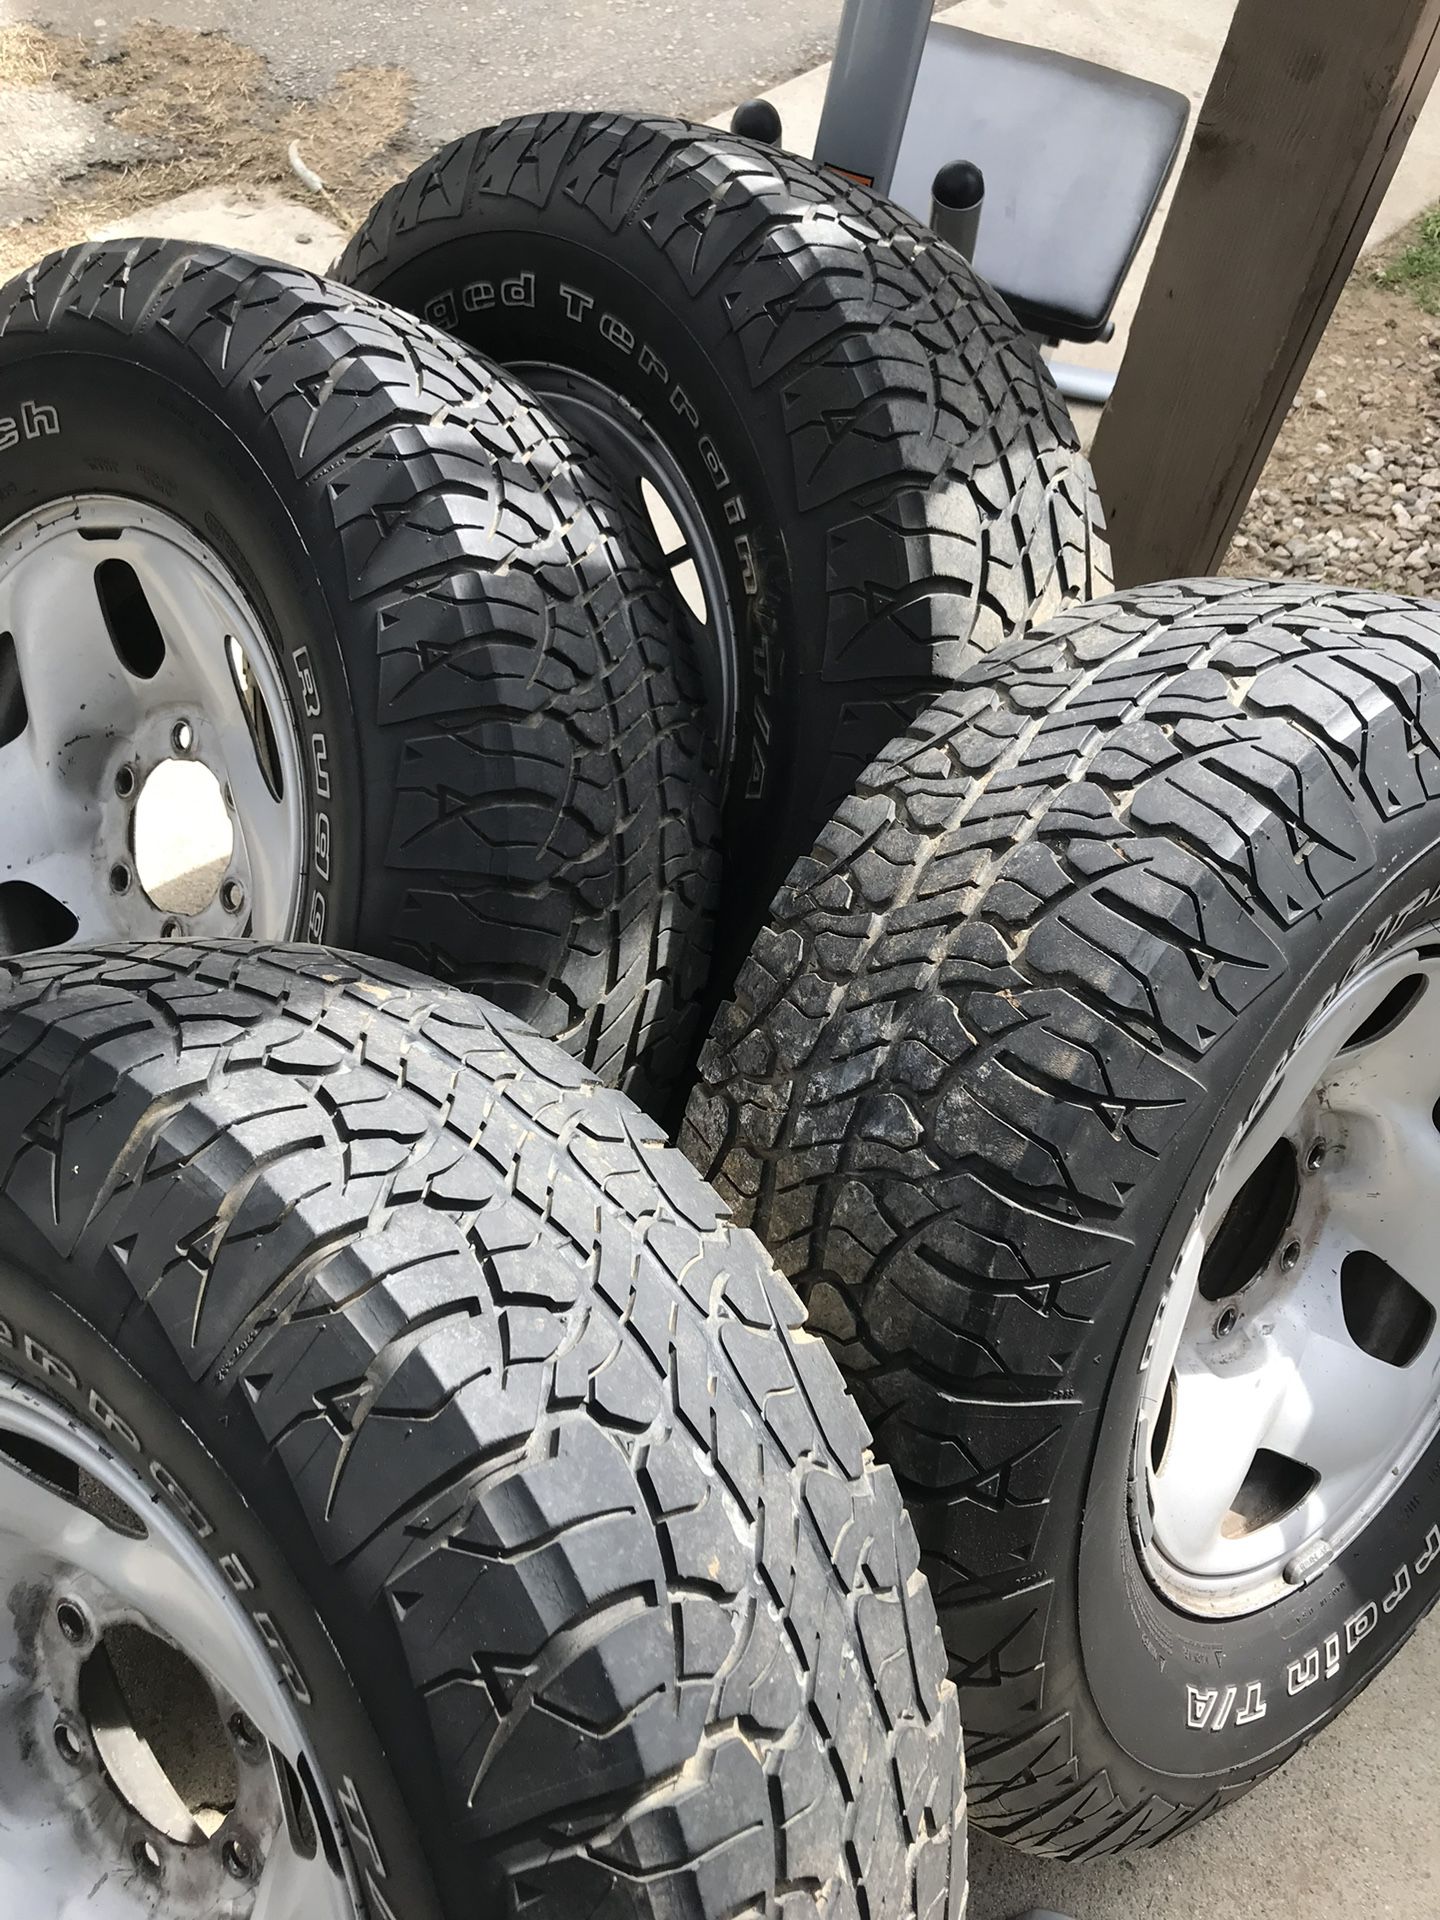 Toyota Prerunner Wheels And Tires 